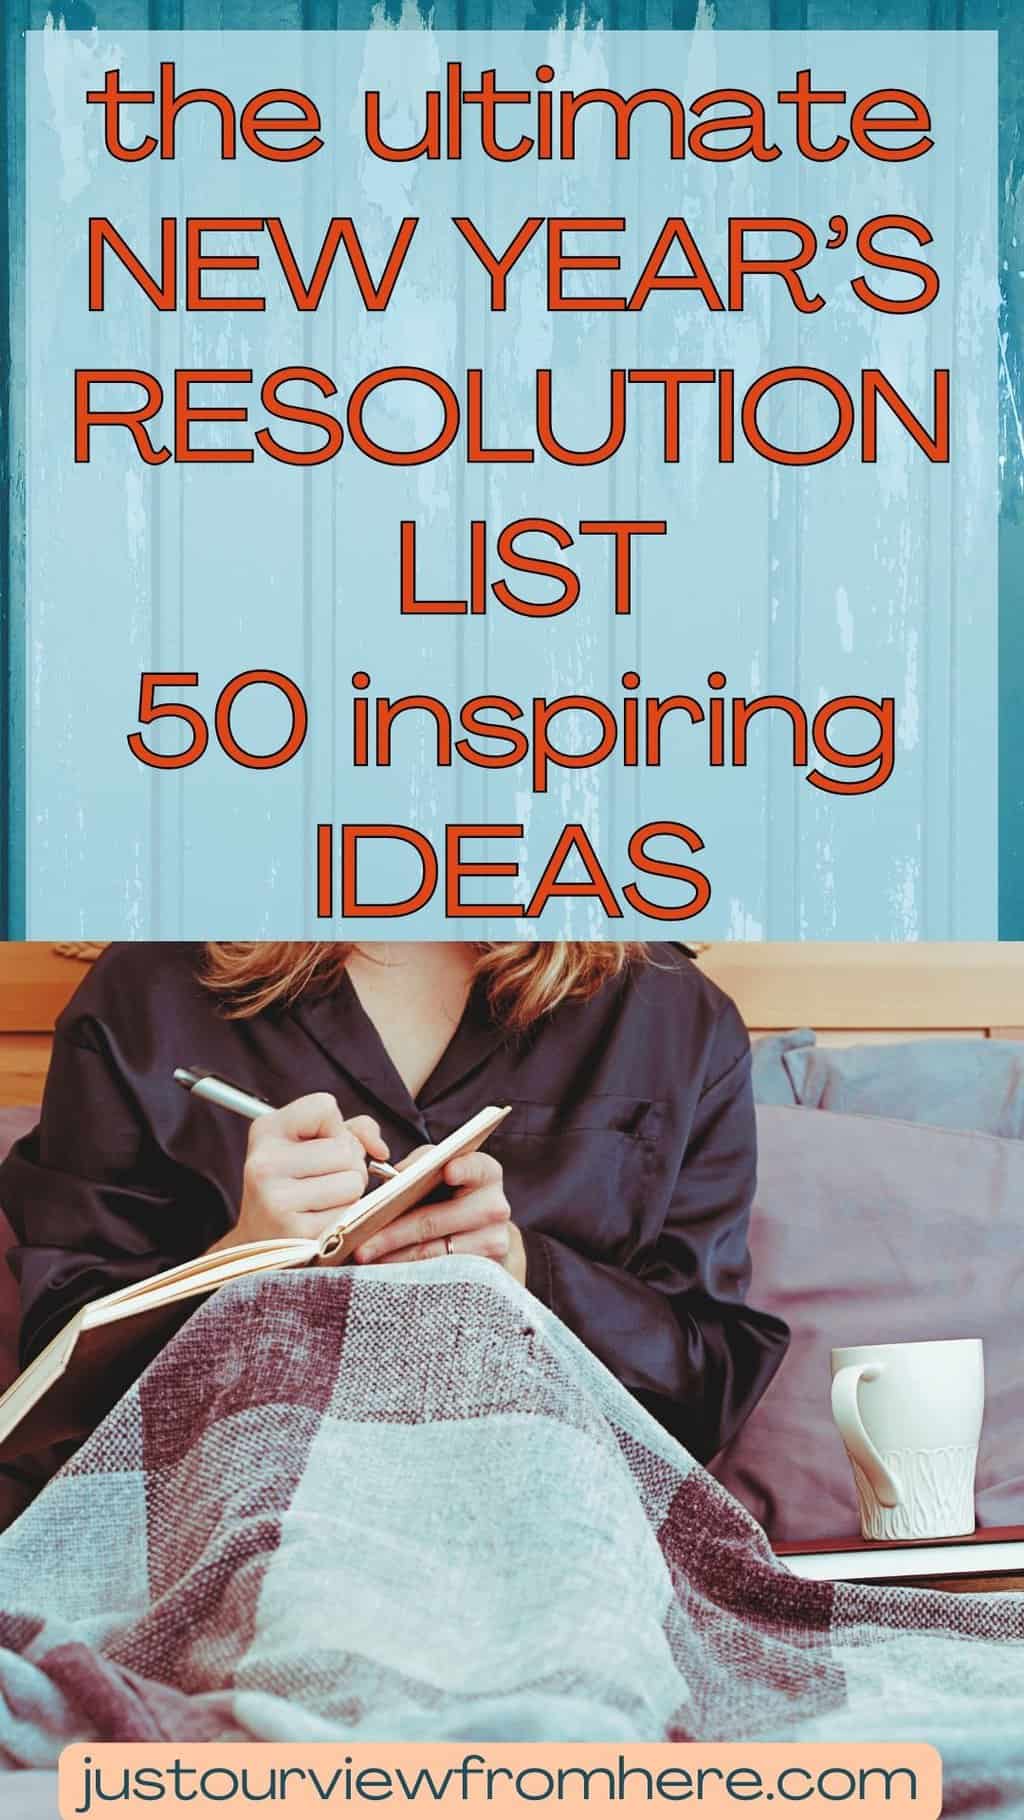 the ultimate new year's resolution list 50 inspiring ideas